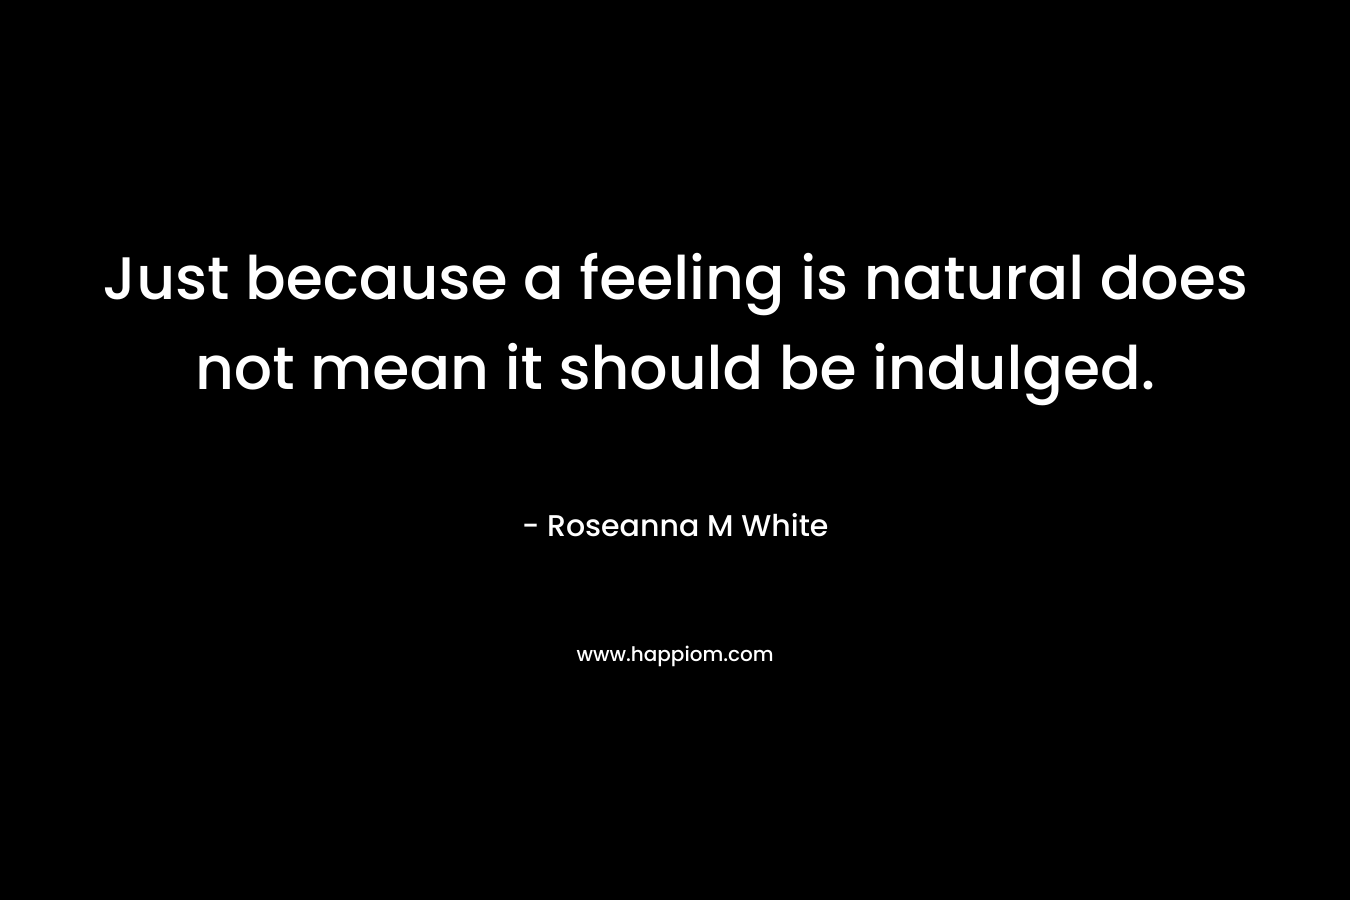 Just because a feeling is natural does not mean it should be indulged. – Roseanna M White